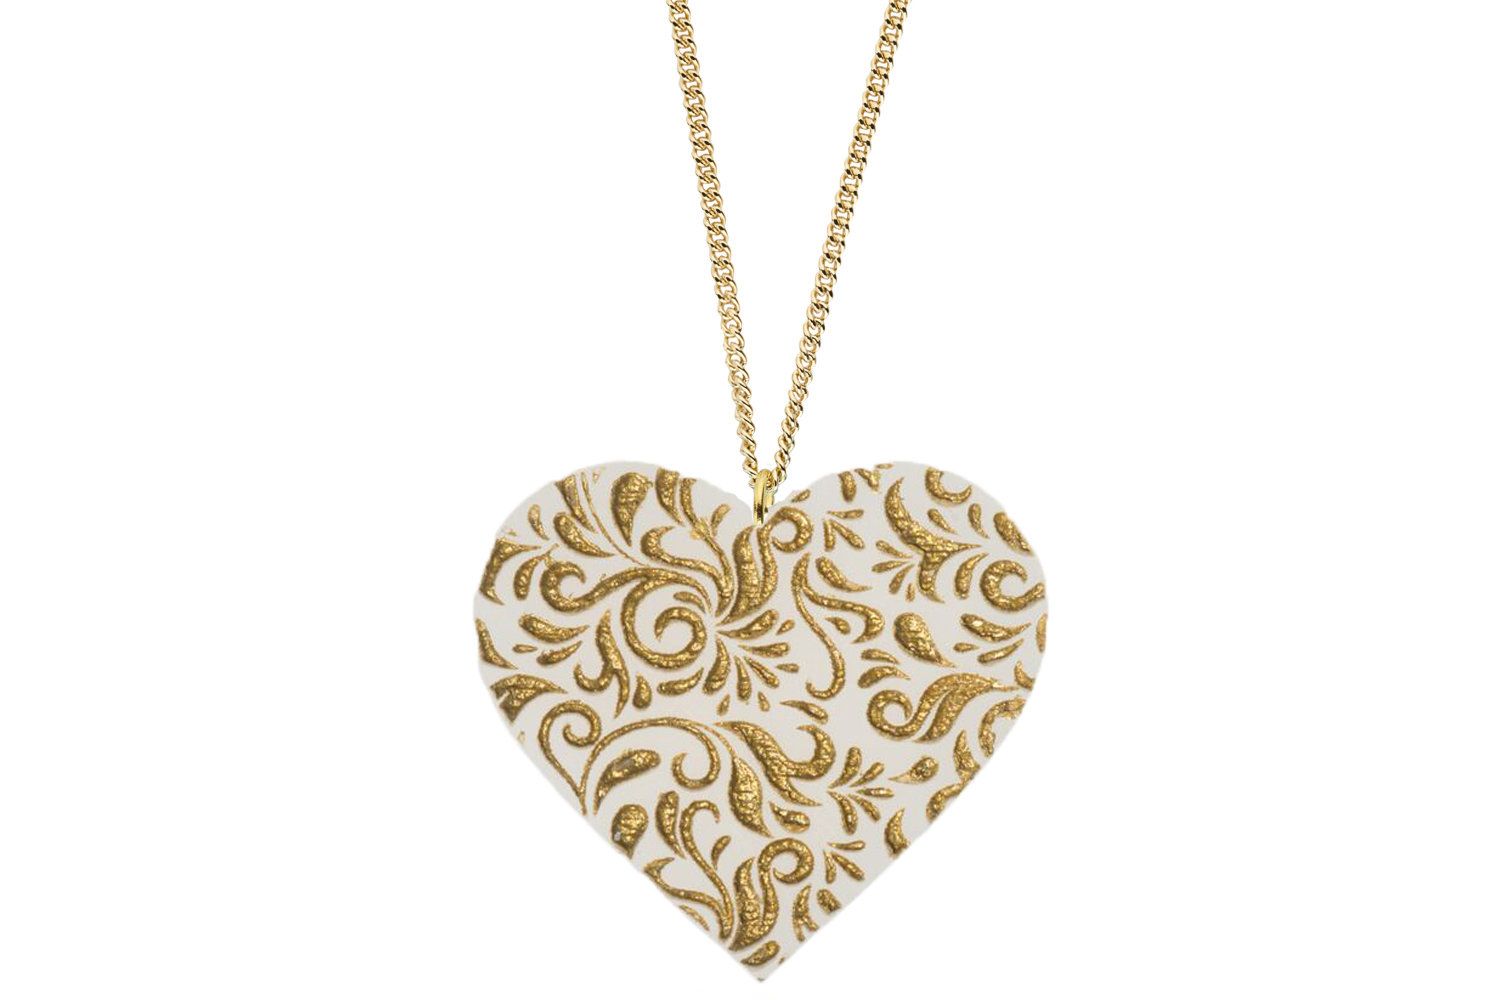 Heart Scroll Pendant Carved Style Refined with Paint on Chain Necklace